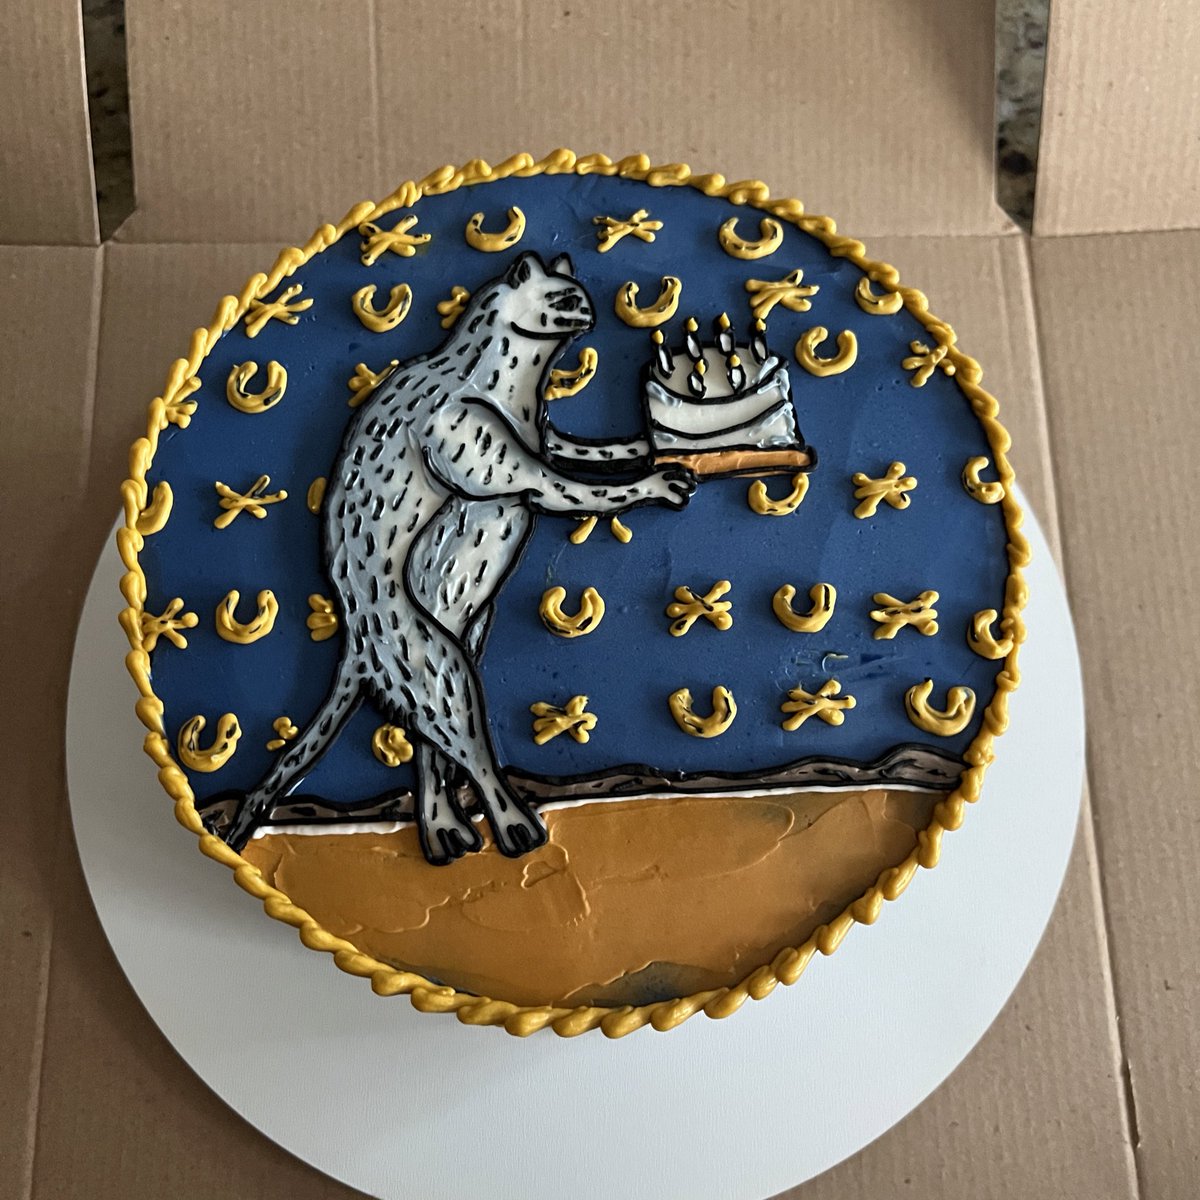 it’s my bday today and this is my cake